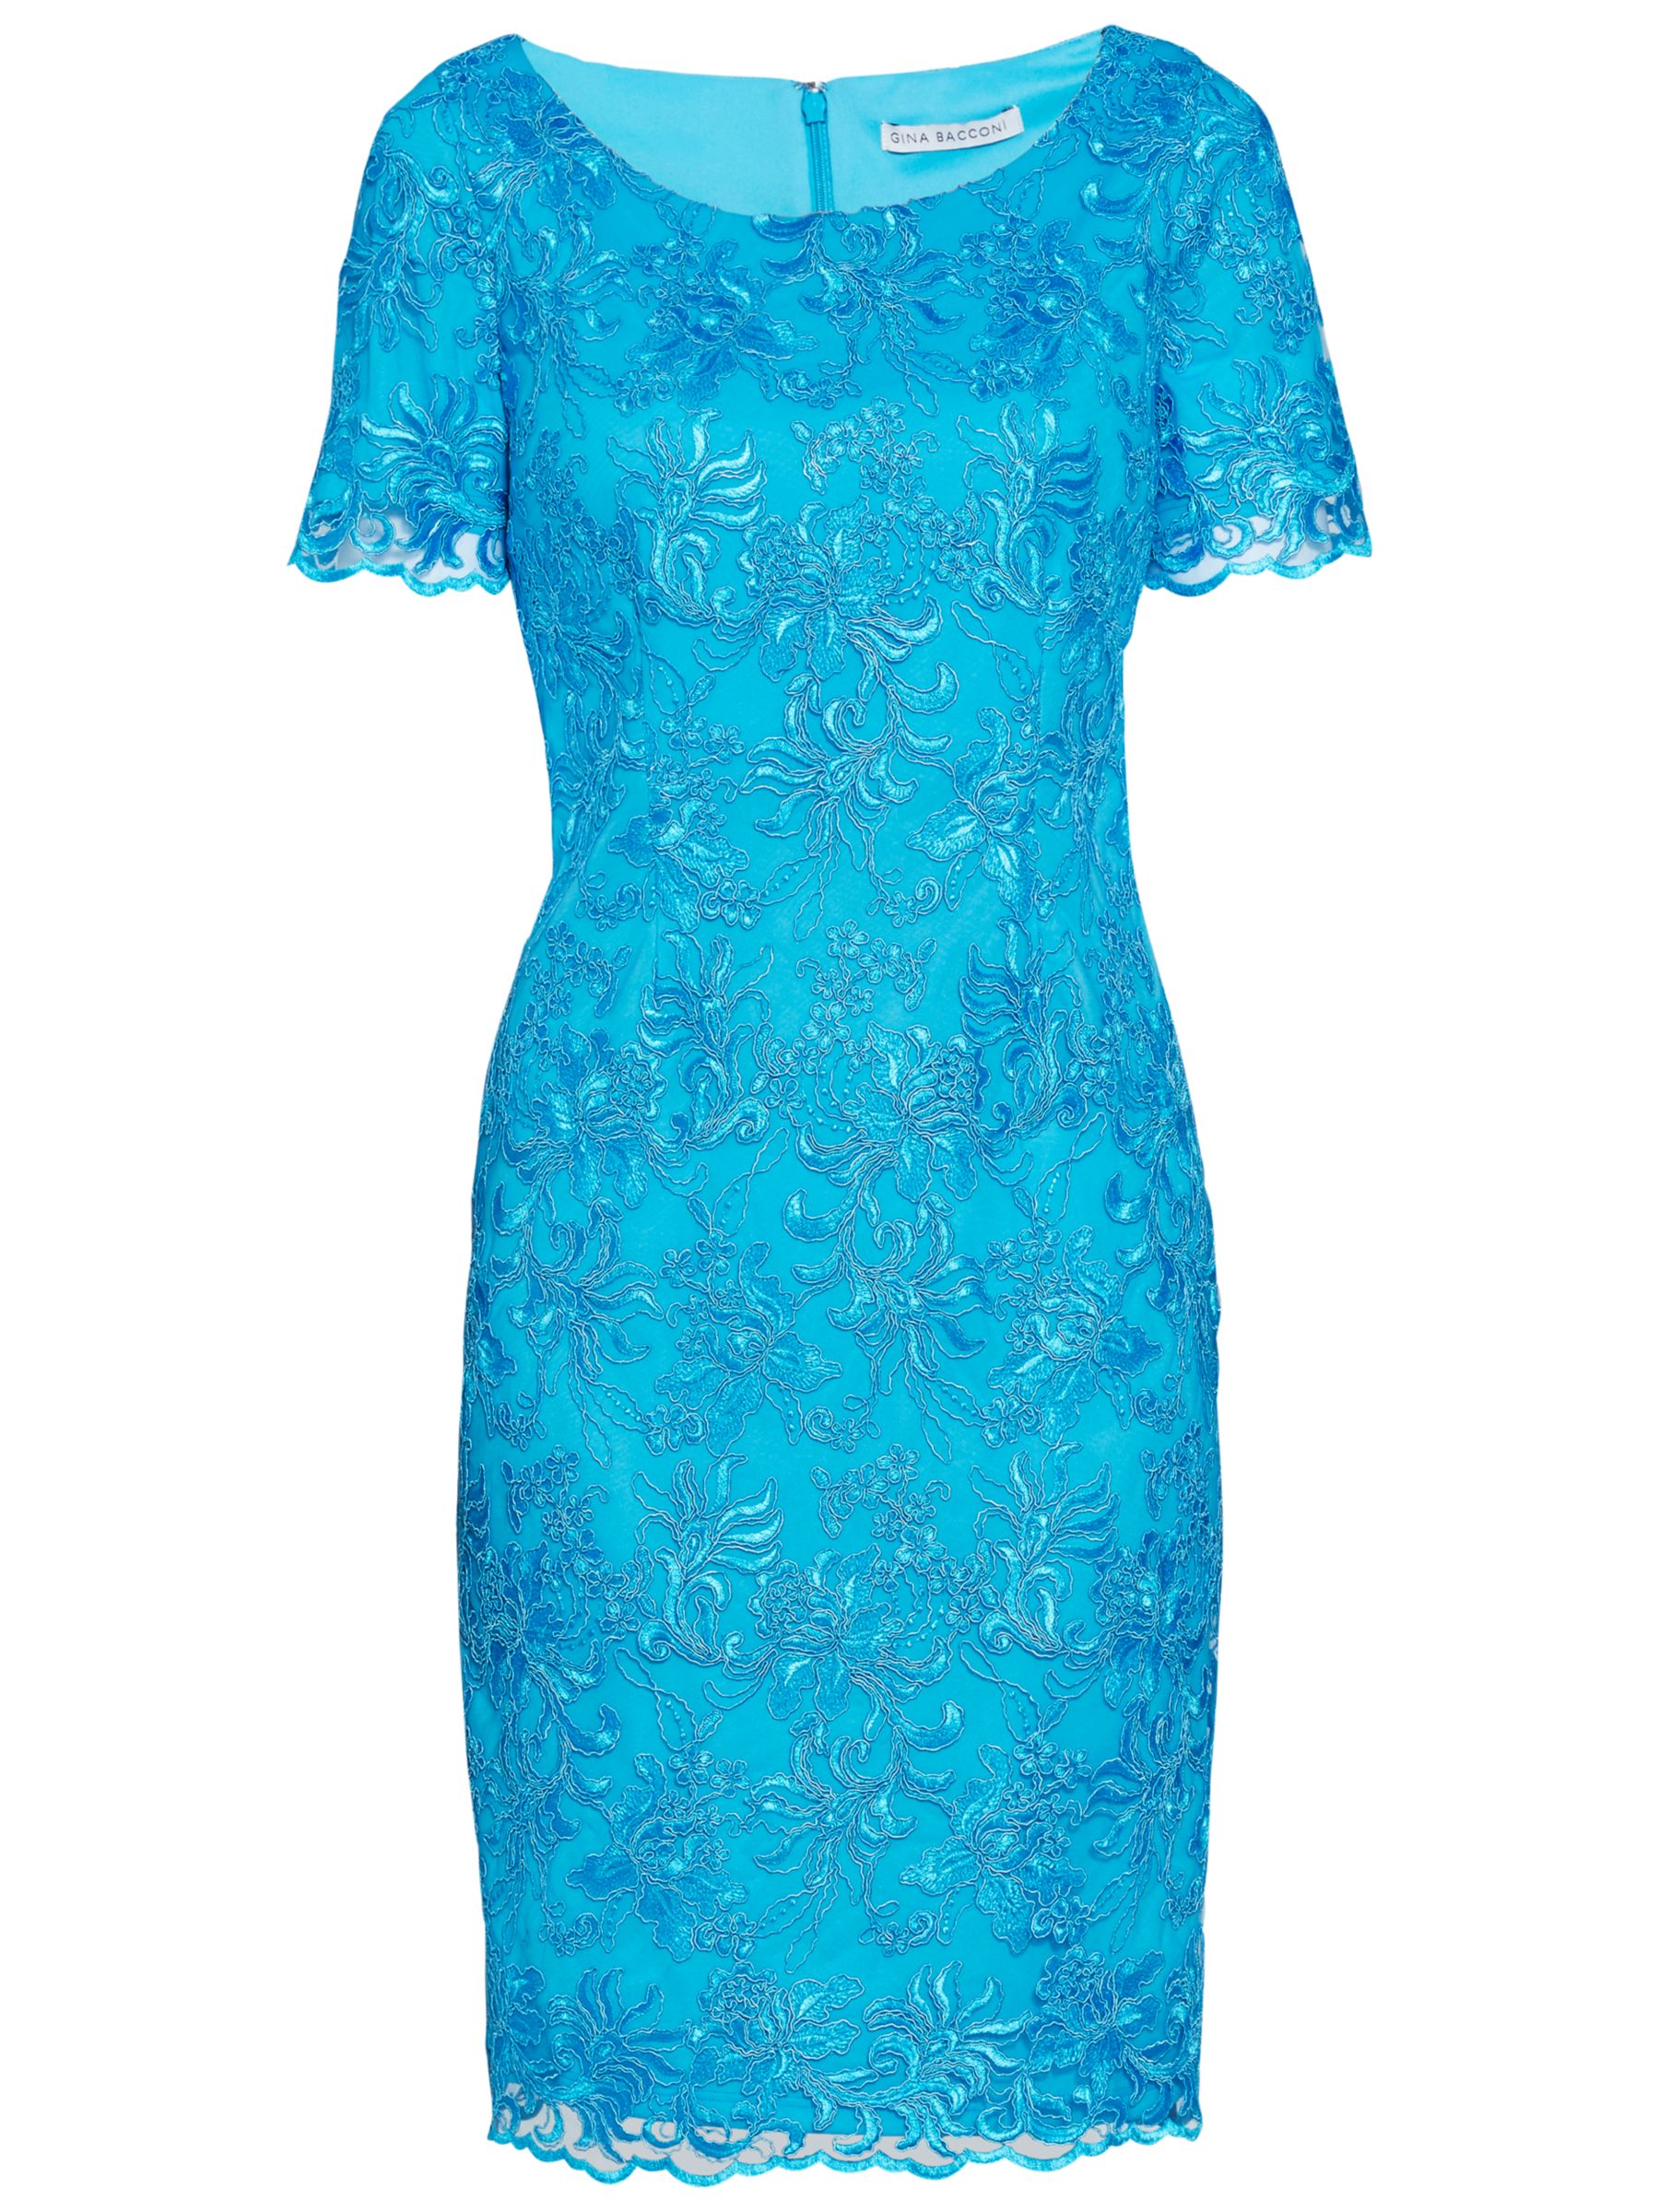 Gina Bacconi Embroidered Corded Dress, Summer Blue, 20